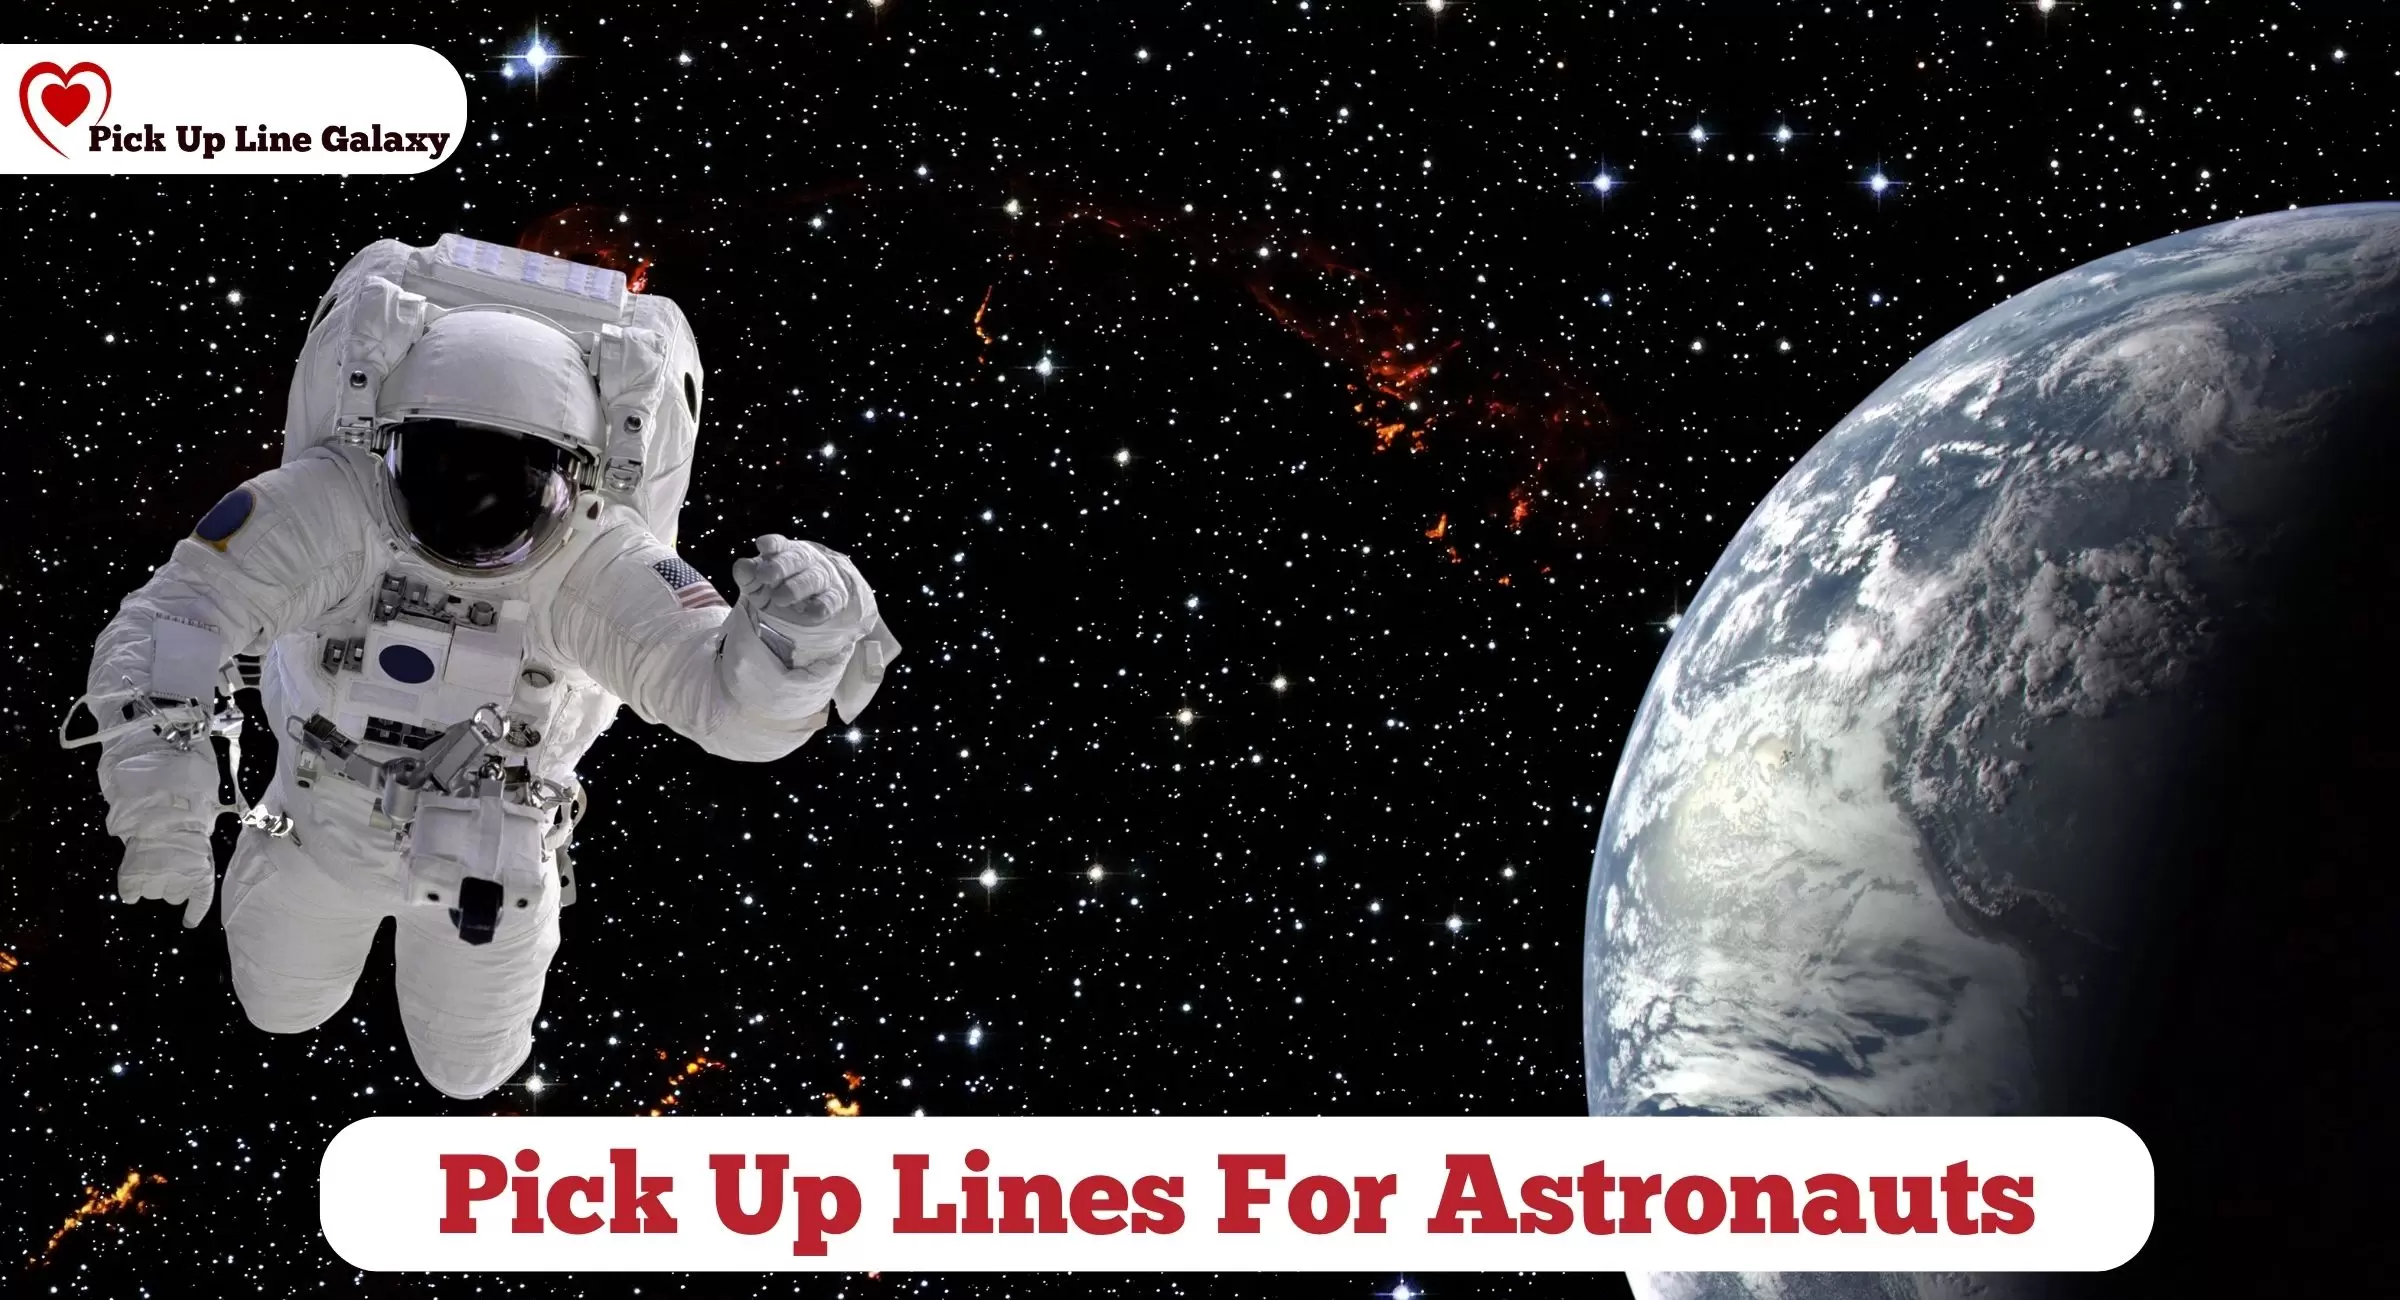 Pick Up Lines For Astronauts